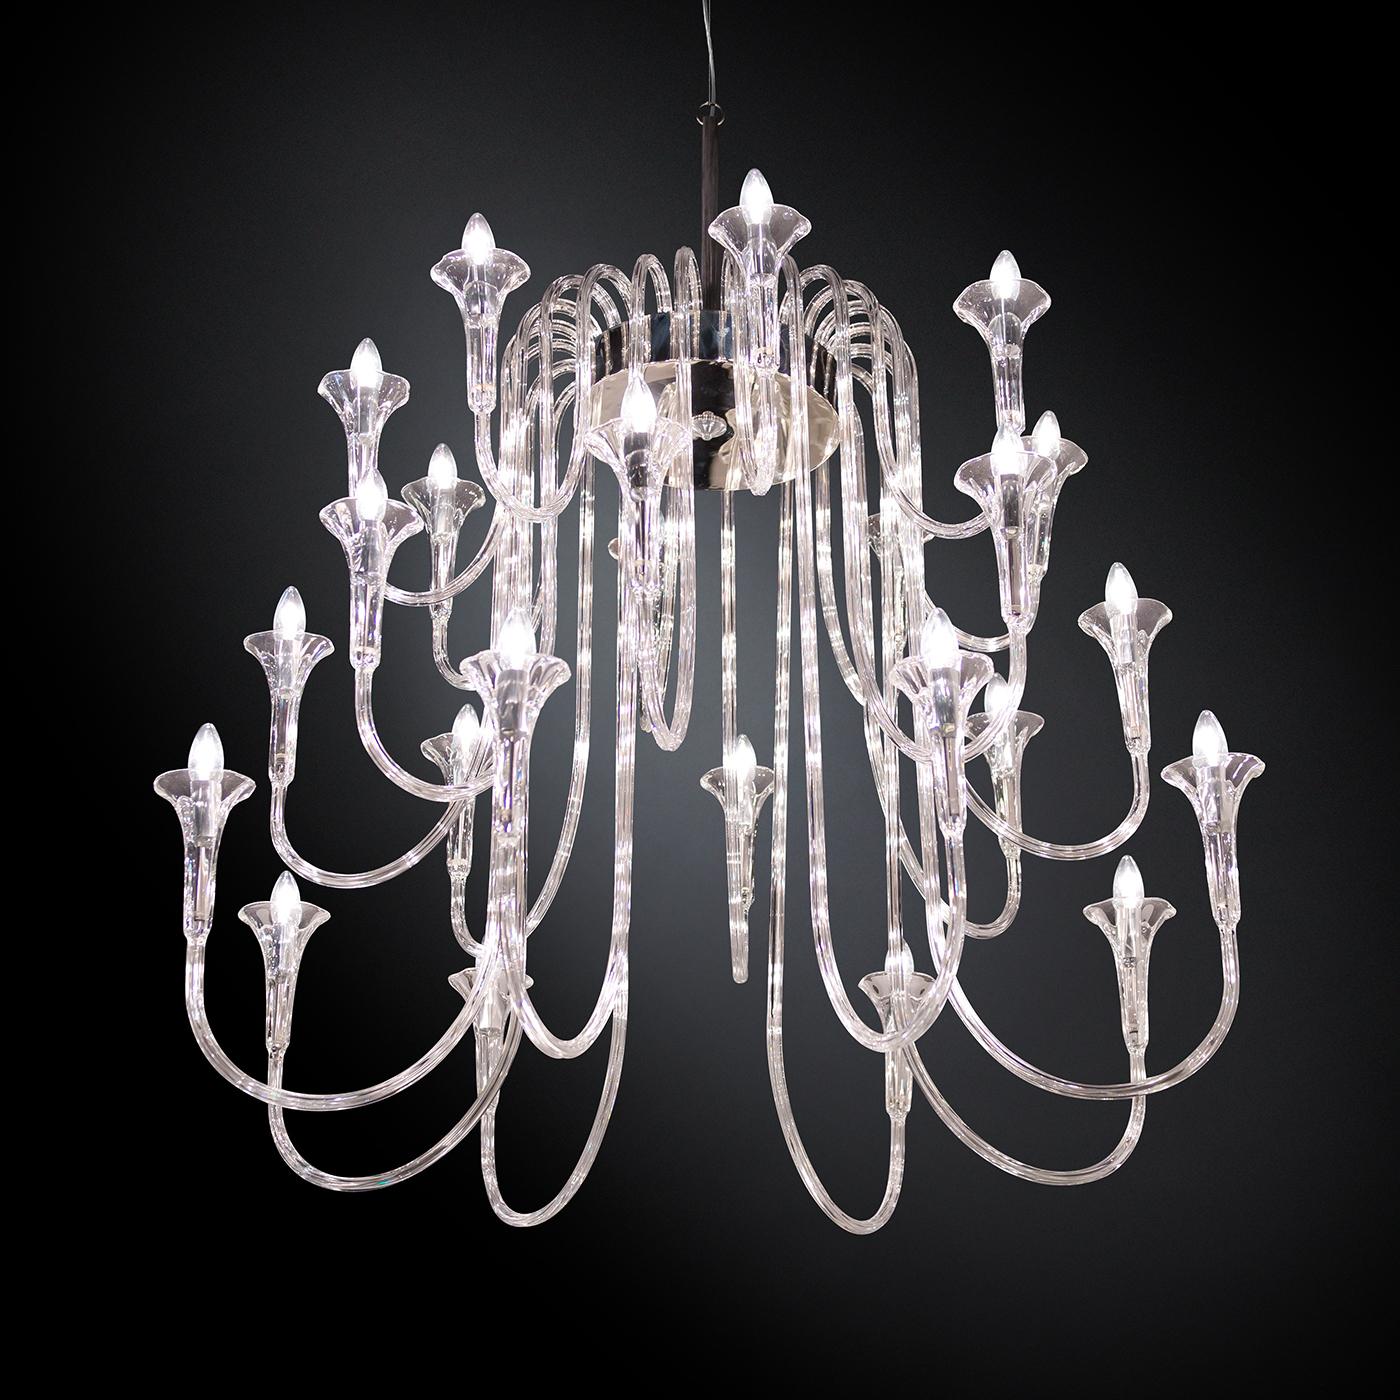 Part of the Octopus collection, this chandelier is a magnificent decorative and functional piece that will capture the eye and the imagination. Its structure comprises a top steel ring from which a cascade of 24 low-thermal-expansion borosilicate